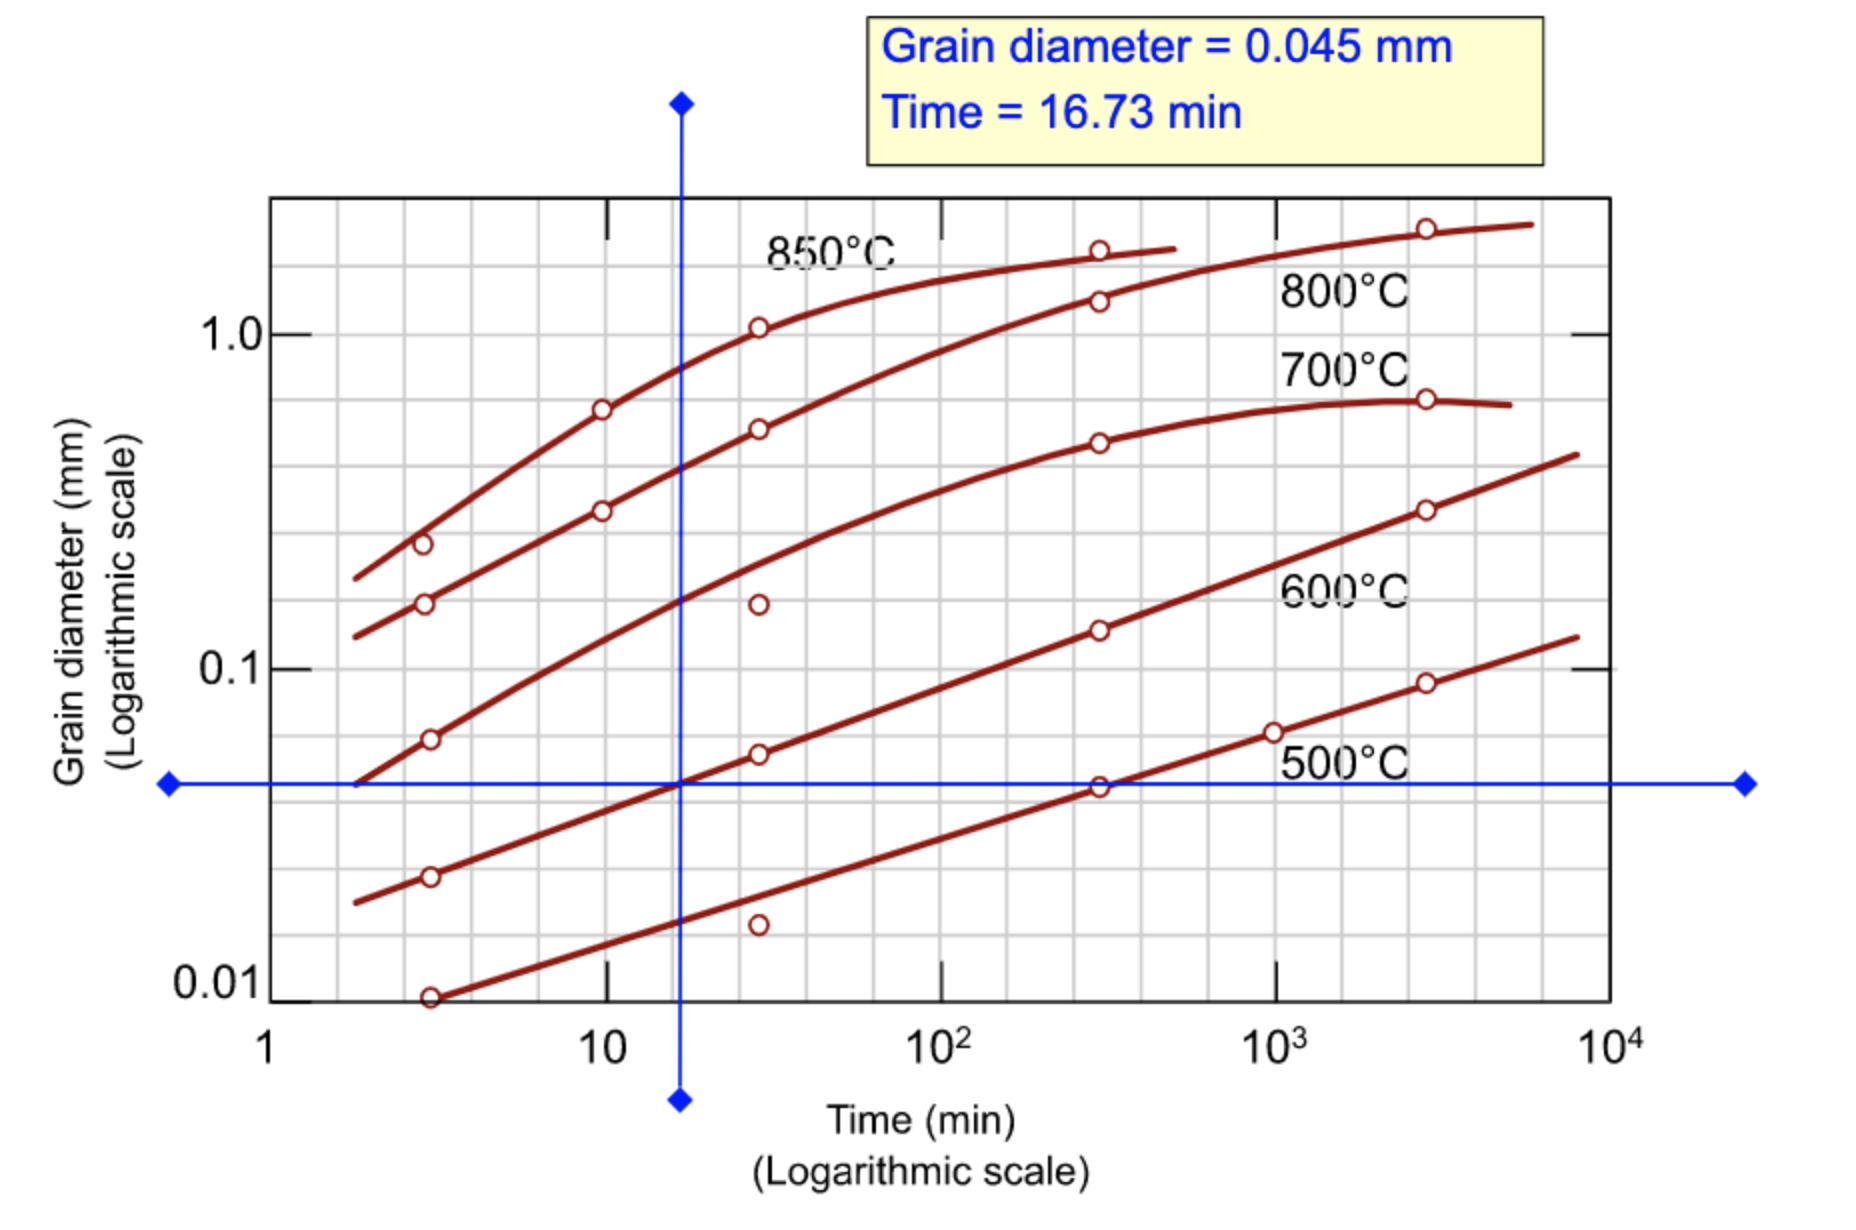 Grain diameter = 0.045 mm
Time = 16.73 min
850°C
800°C
1.0E
700°C
600°C
0.1E
1500°C
0.01
102
104
10
103
Time (min)
(Logarithmic scale)
Grain diameter (mm)
(Logarithmic scale)
